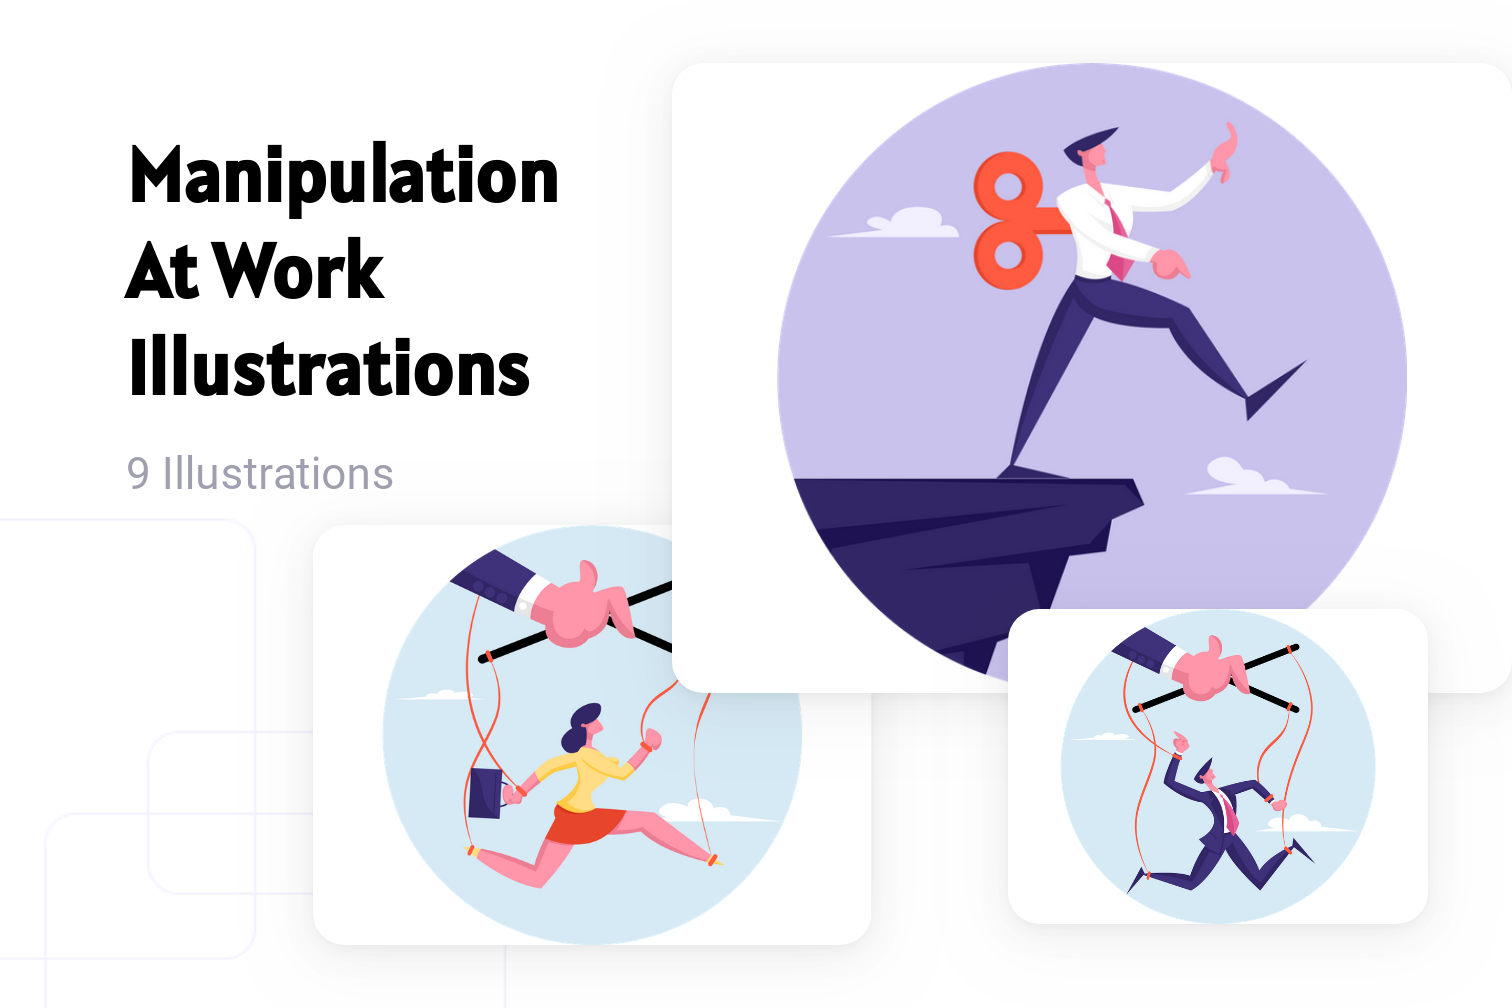 13 Mistrust Illustrations - Free in SVG, PNG, EPS - IconScout